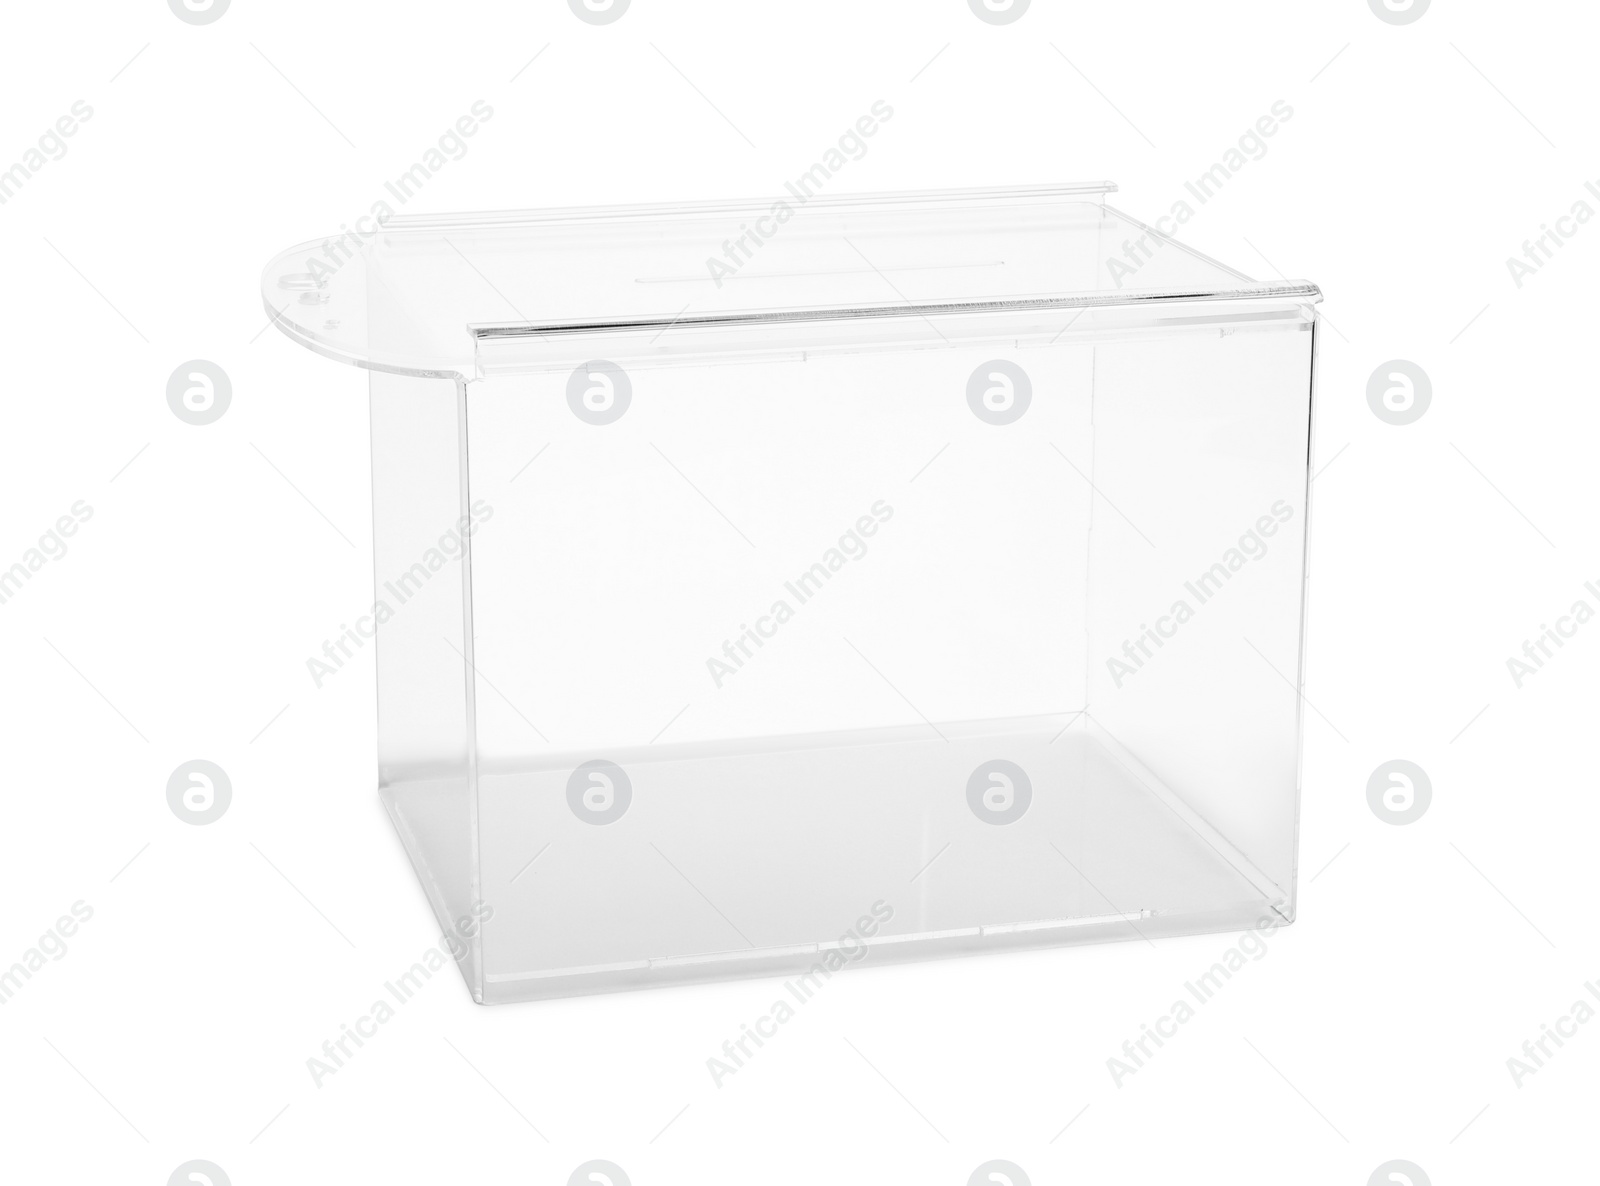 Photo of One transparent ballot box isolated on white